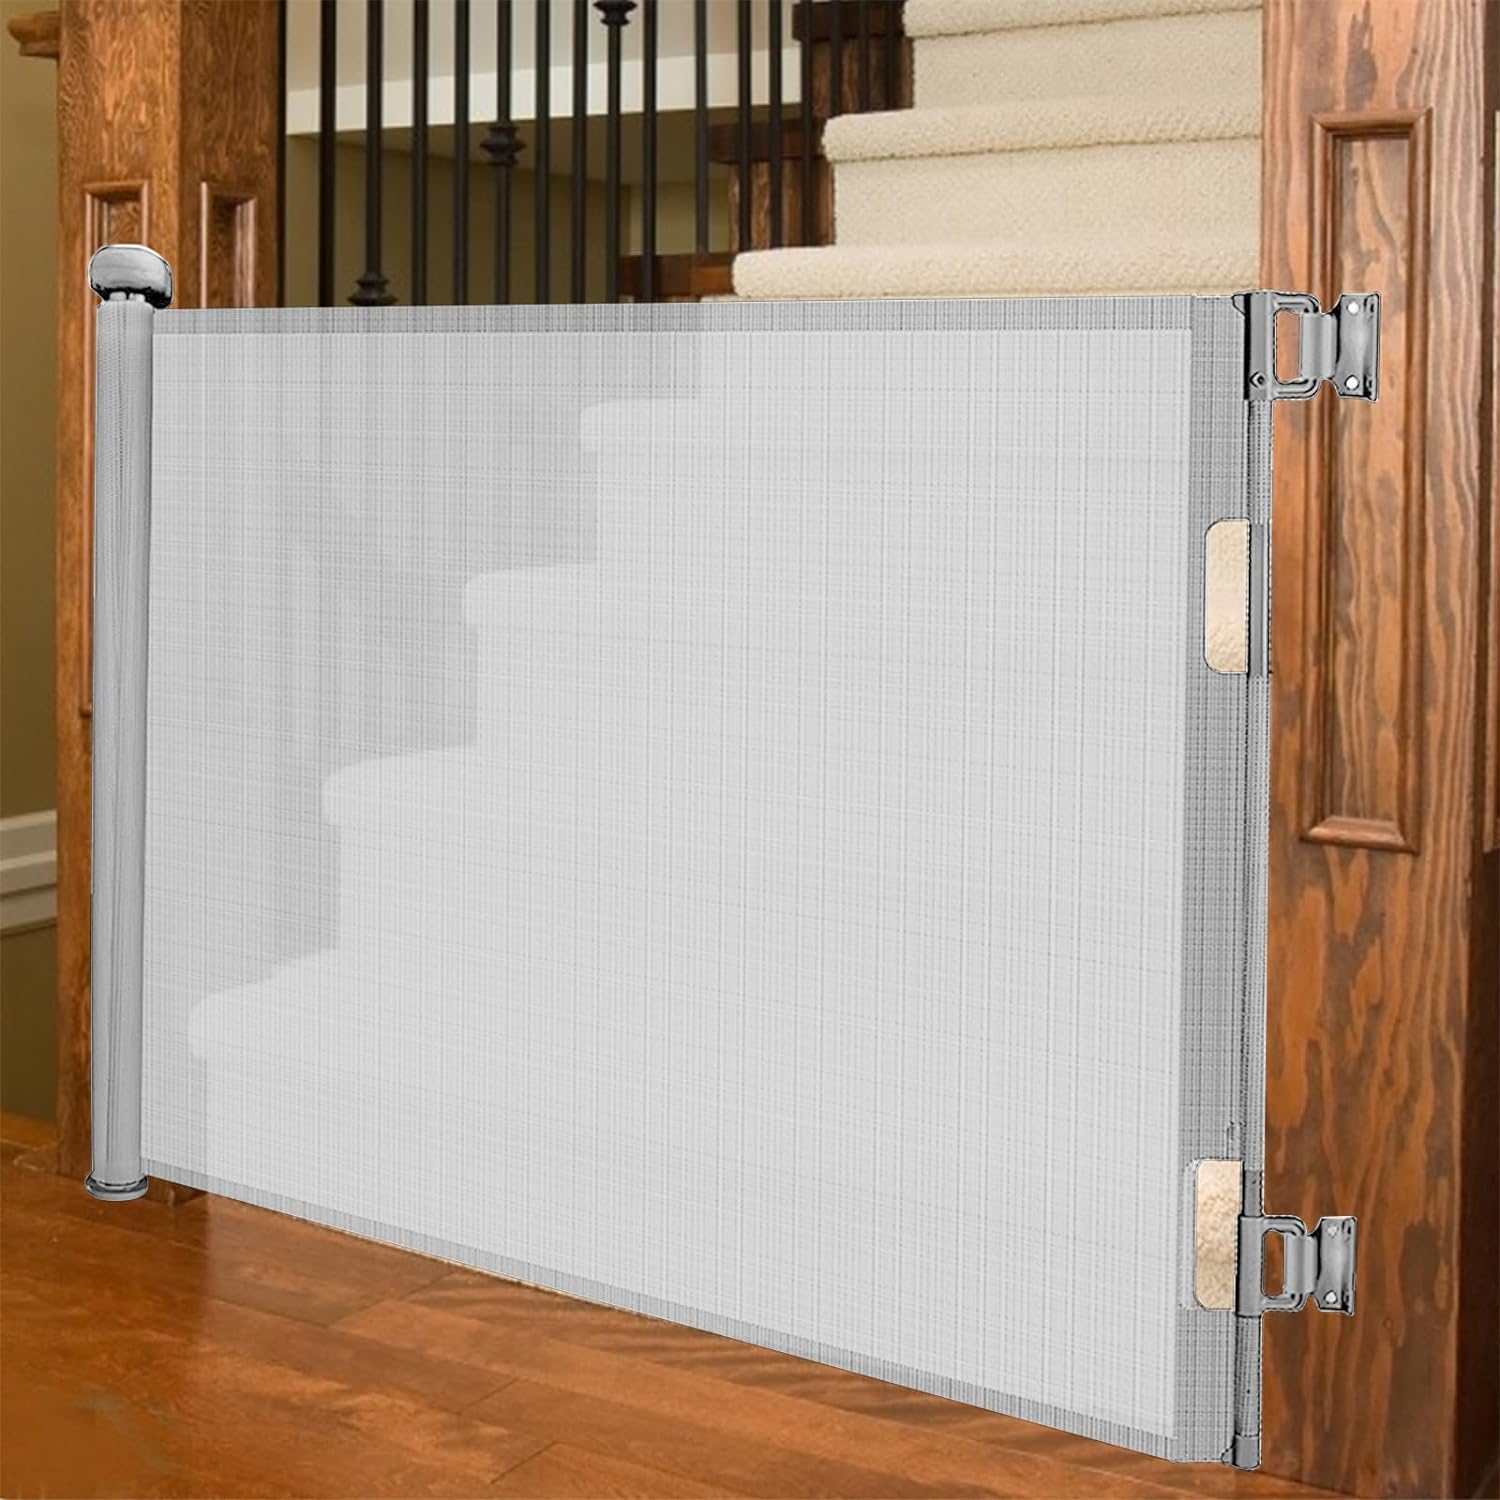 Retractable Baby and Pet Safety Gate - Ideal for Stairs, Corridors, Doors, Indoors, and Outdoors